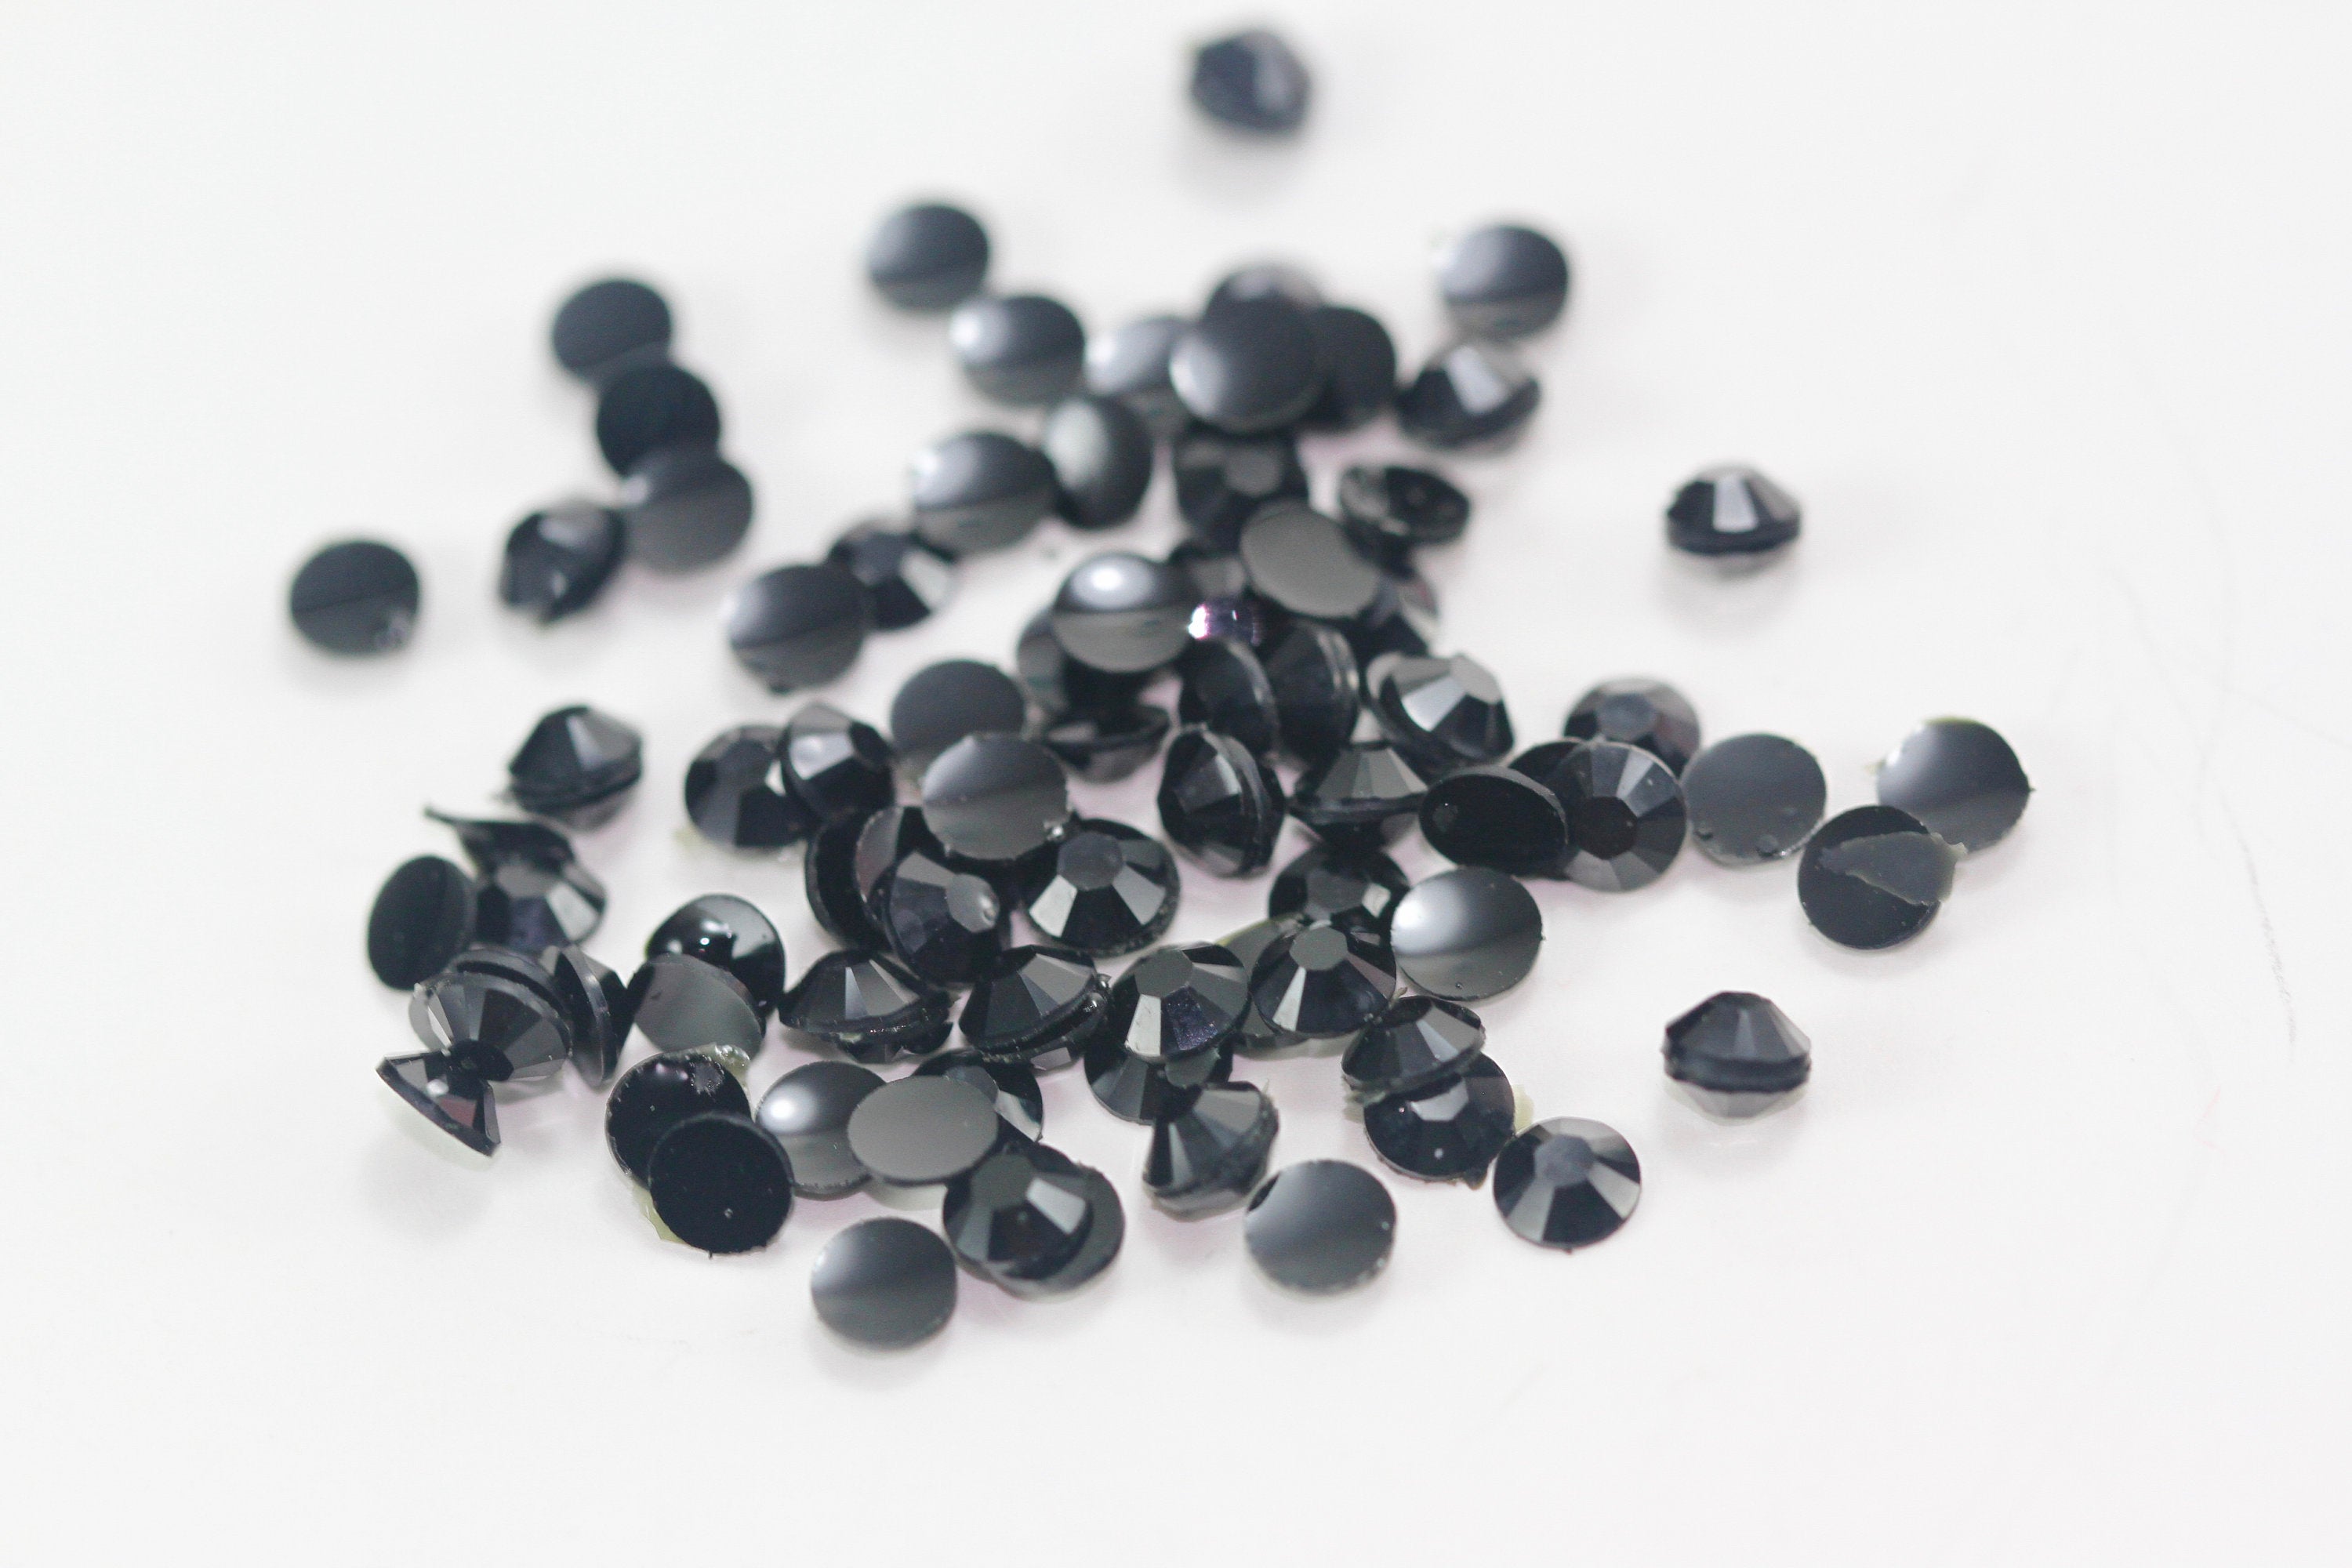 CLEARANCE!!! - 1 pack (Approx 50pcs), 4mm High Quality Rhinestone in Black